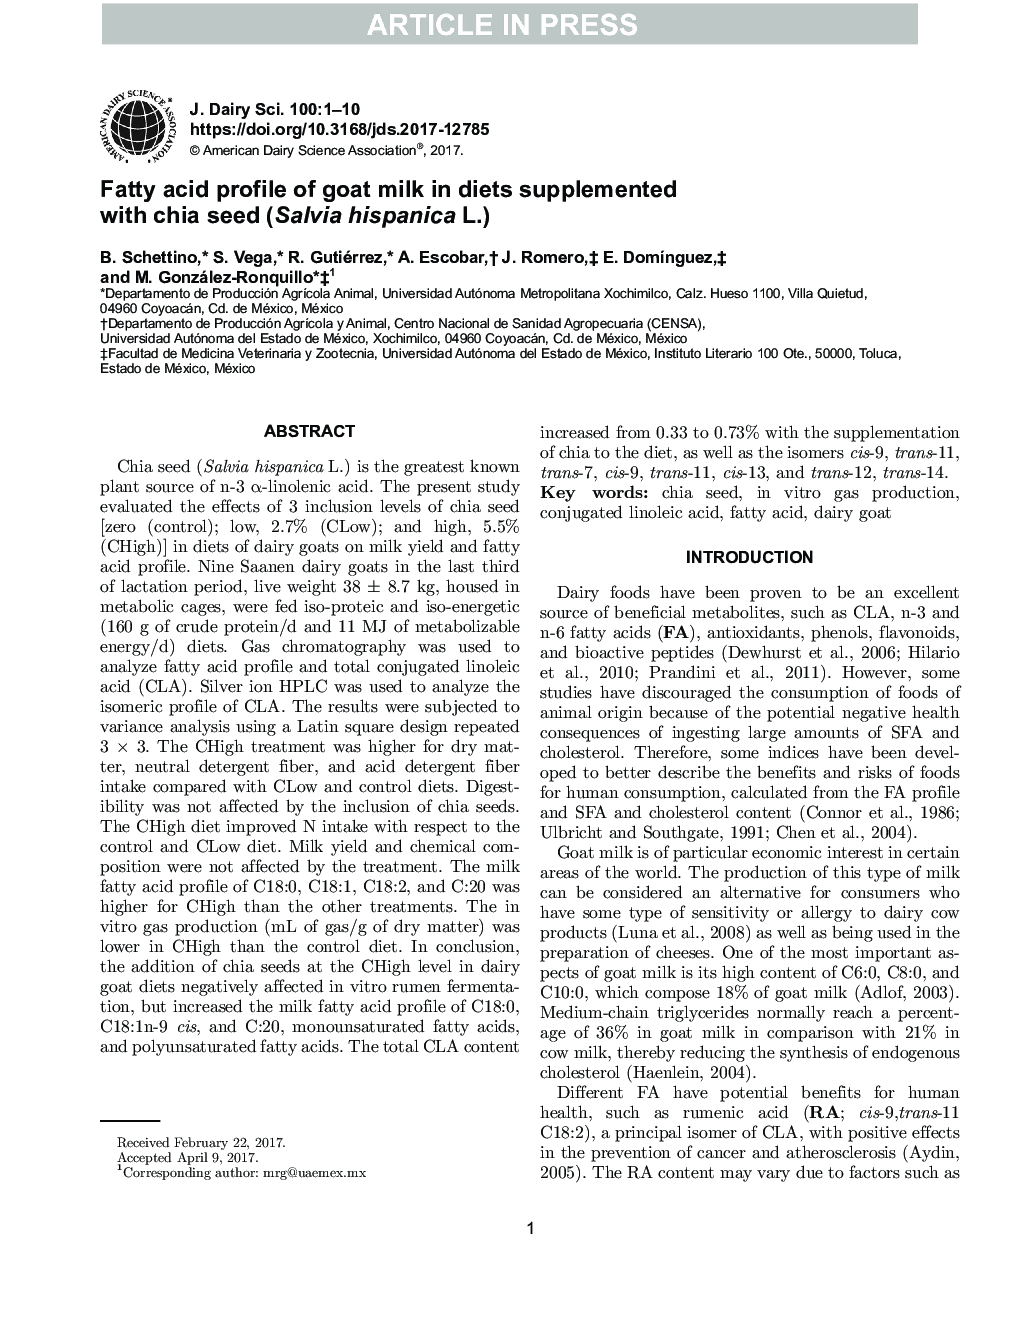 Fatty acid profile of goat milk in diets supplemented with chia seed (Salvia hispanica L.)